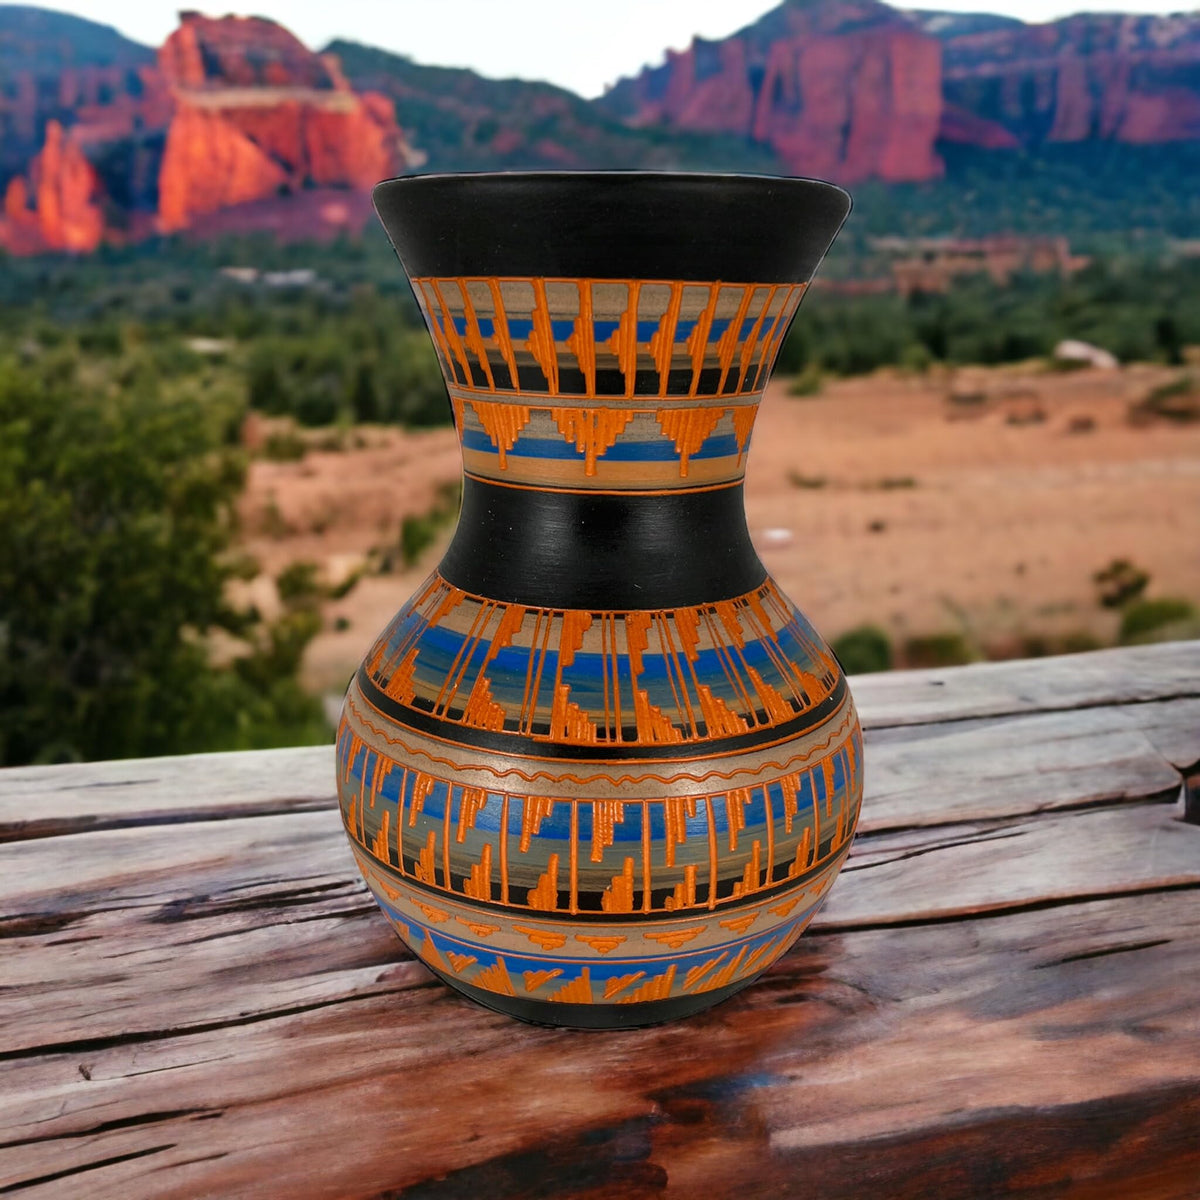 Authentic Native American Pottery, Traditional Vase Style Pot, Genuine Navajo Tribe USA Hand Painted, Artist Signed, Southwestern Home Decor Collectible, Rustic Handmade Decoration